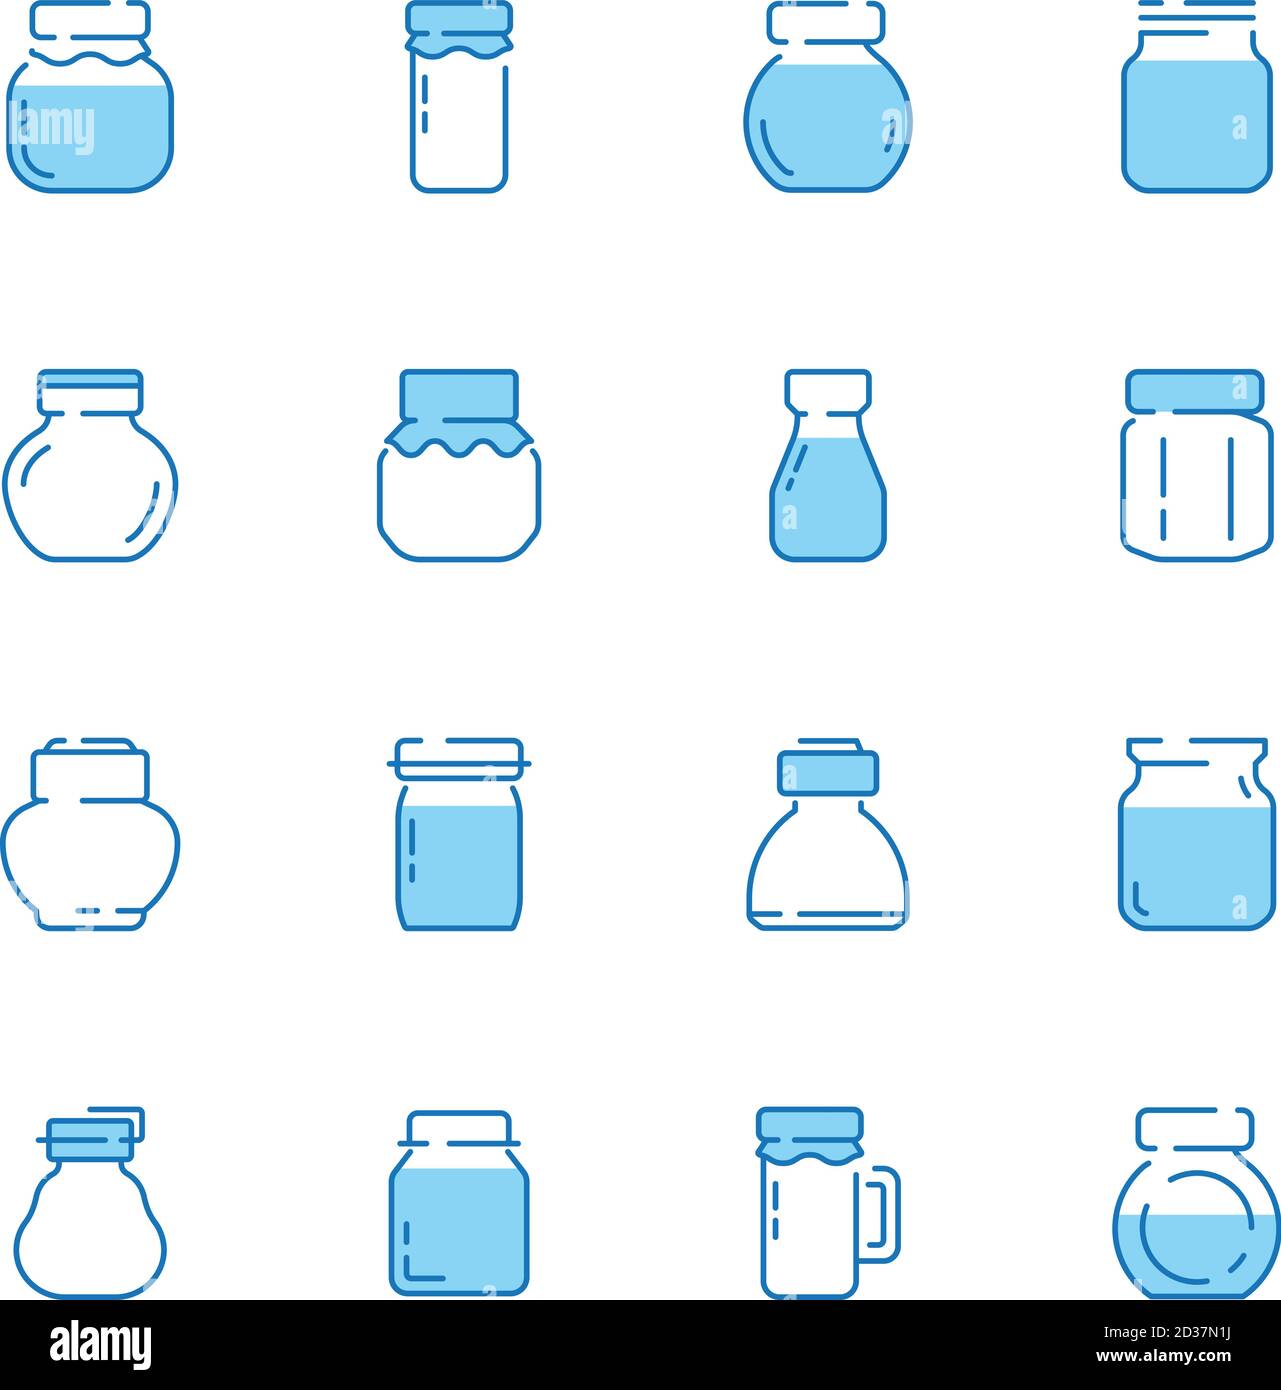 Bottles line icon. Jar packaged with healthy food jam products glass bottles vector symbols Stock Vector